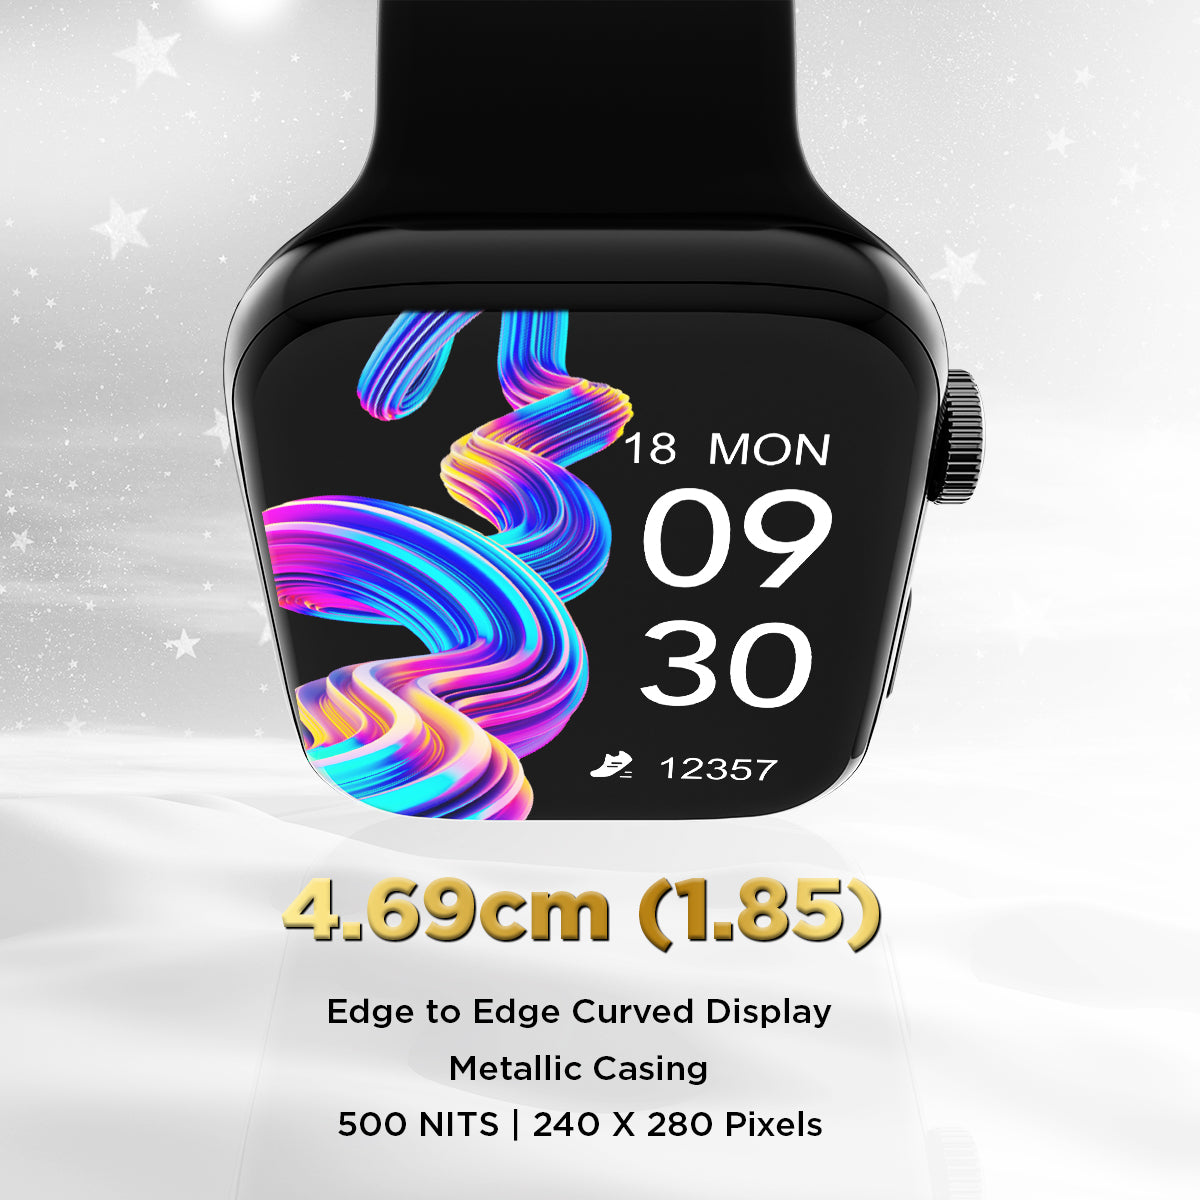 GIZMORE Star 1.85 IPS Gizfit 928 Large Display with Rotating Crown Controls| AI Voice Assistant | Bluetooth Calling Smartwatch